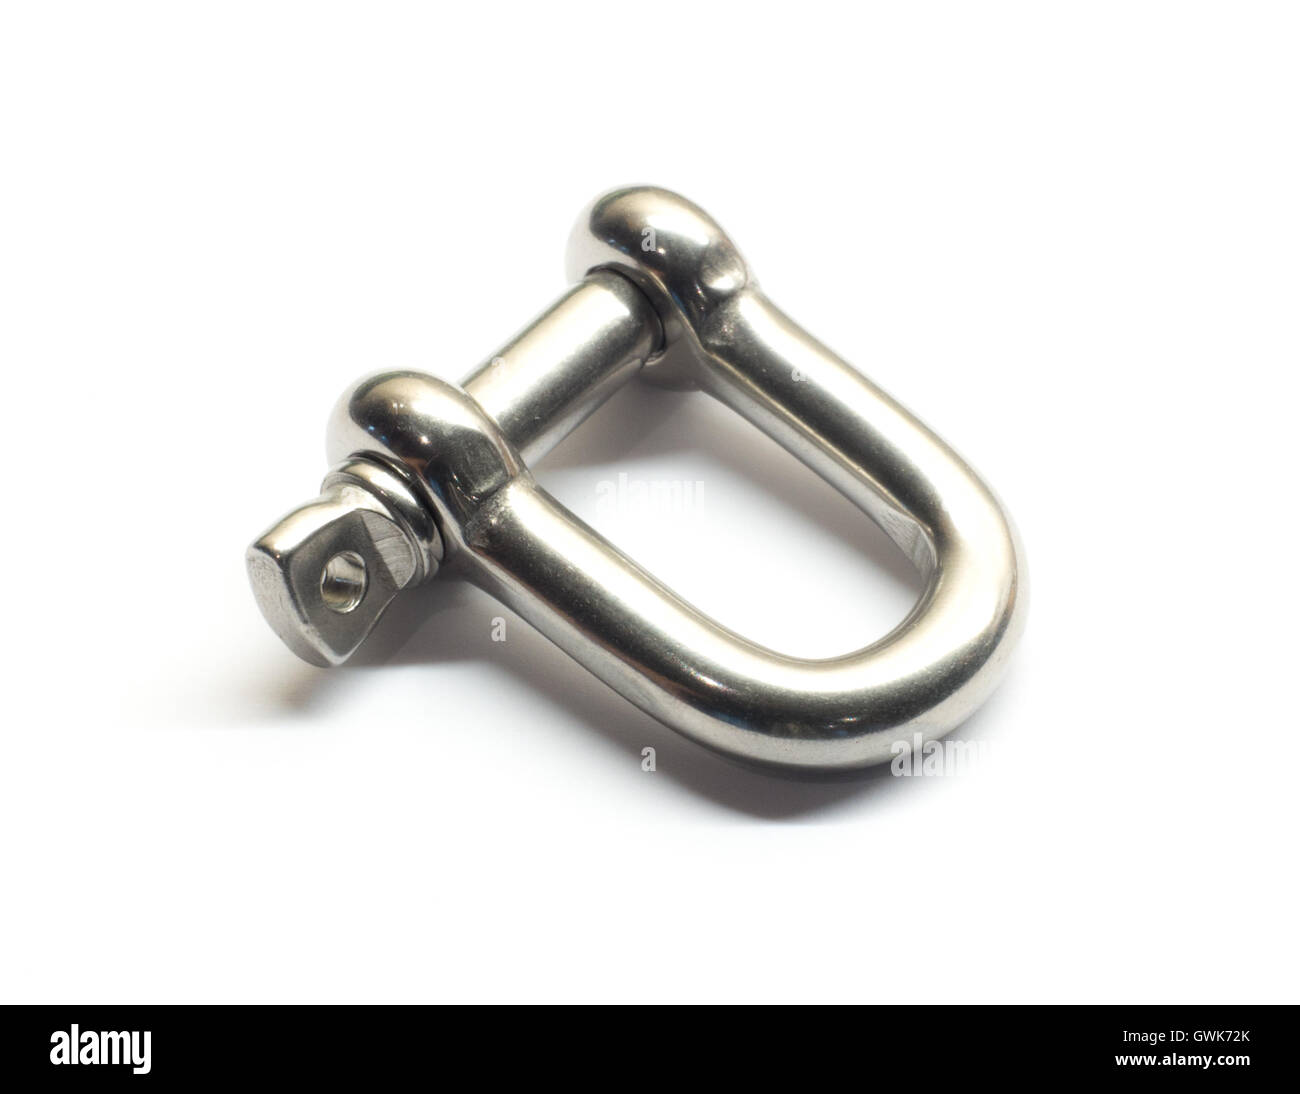 Dee shackle made from 316 A4 stainless steel Stock Photo